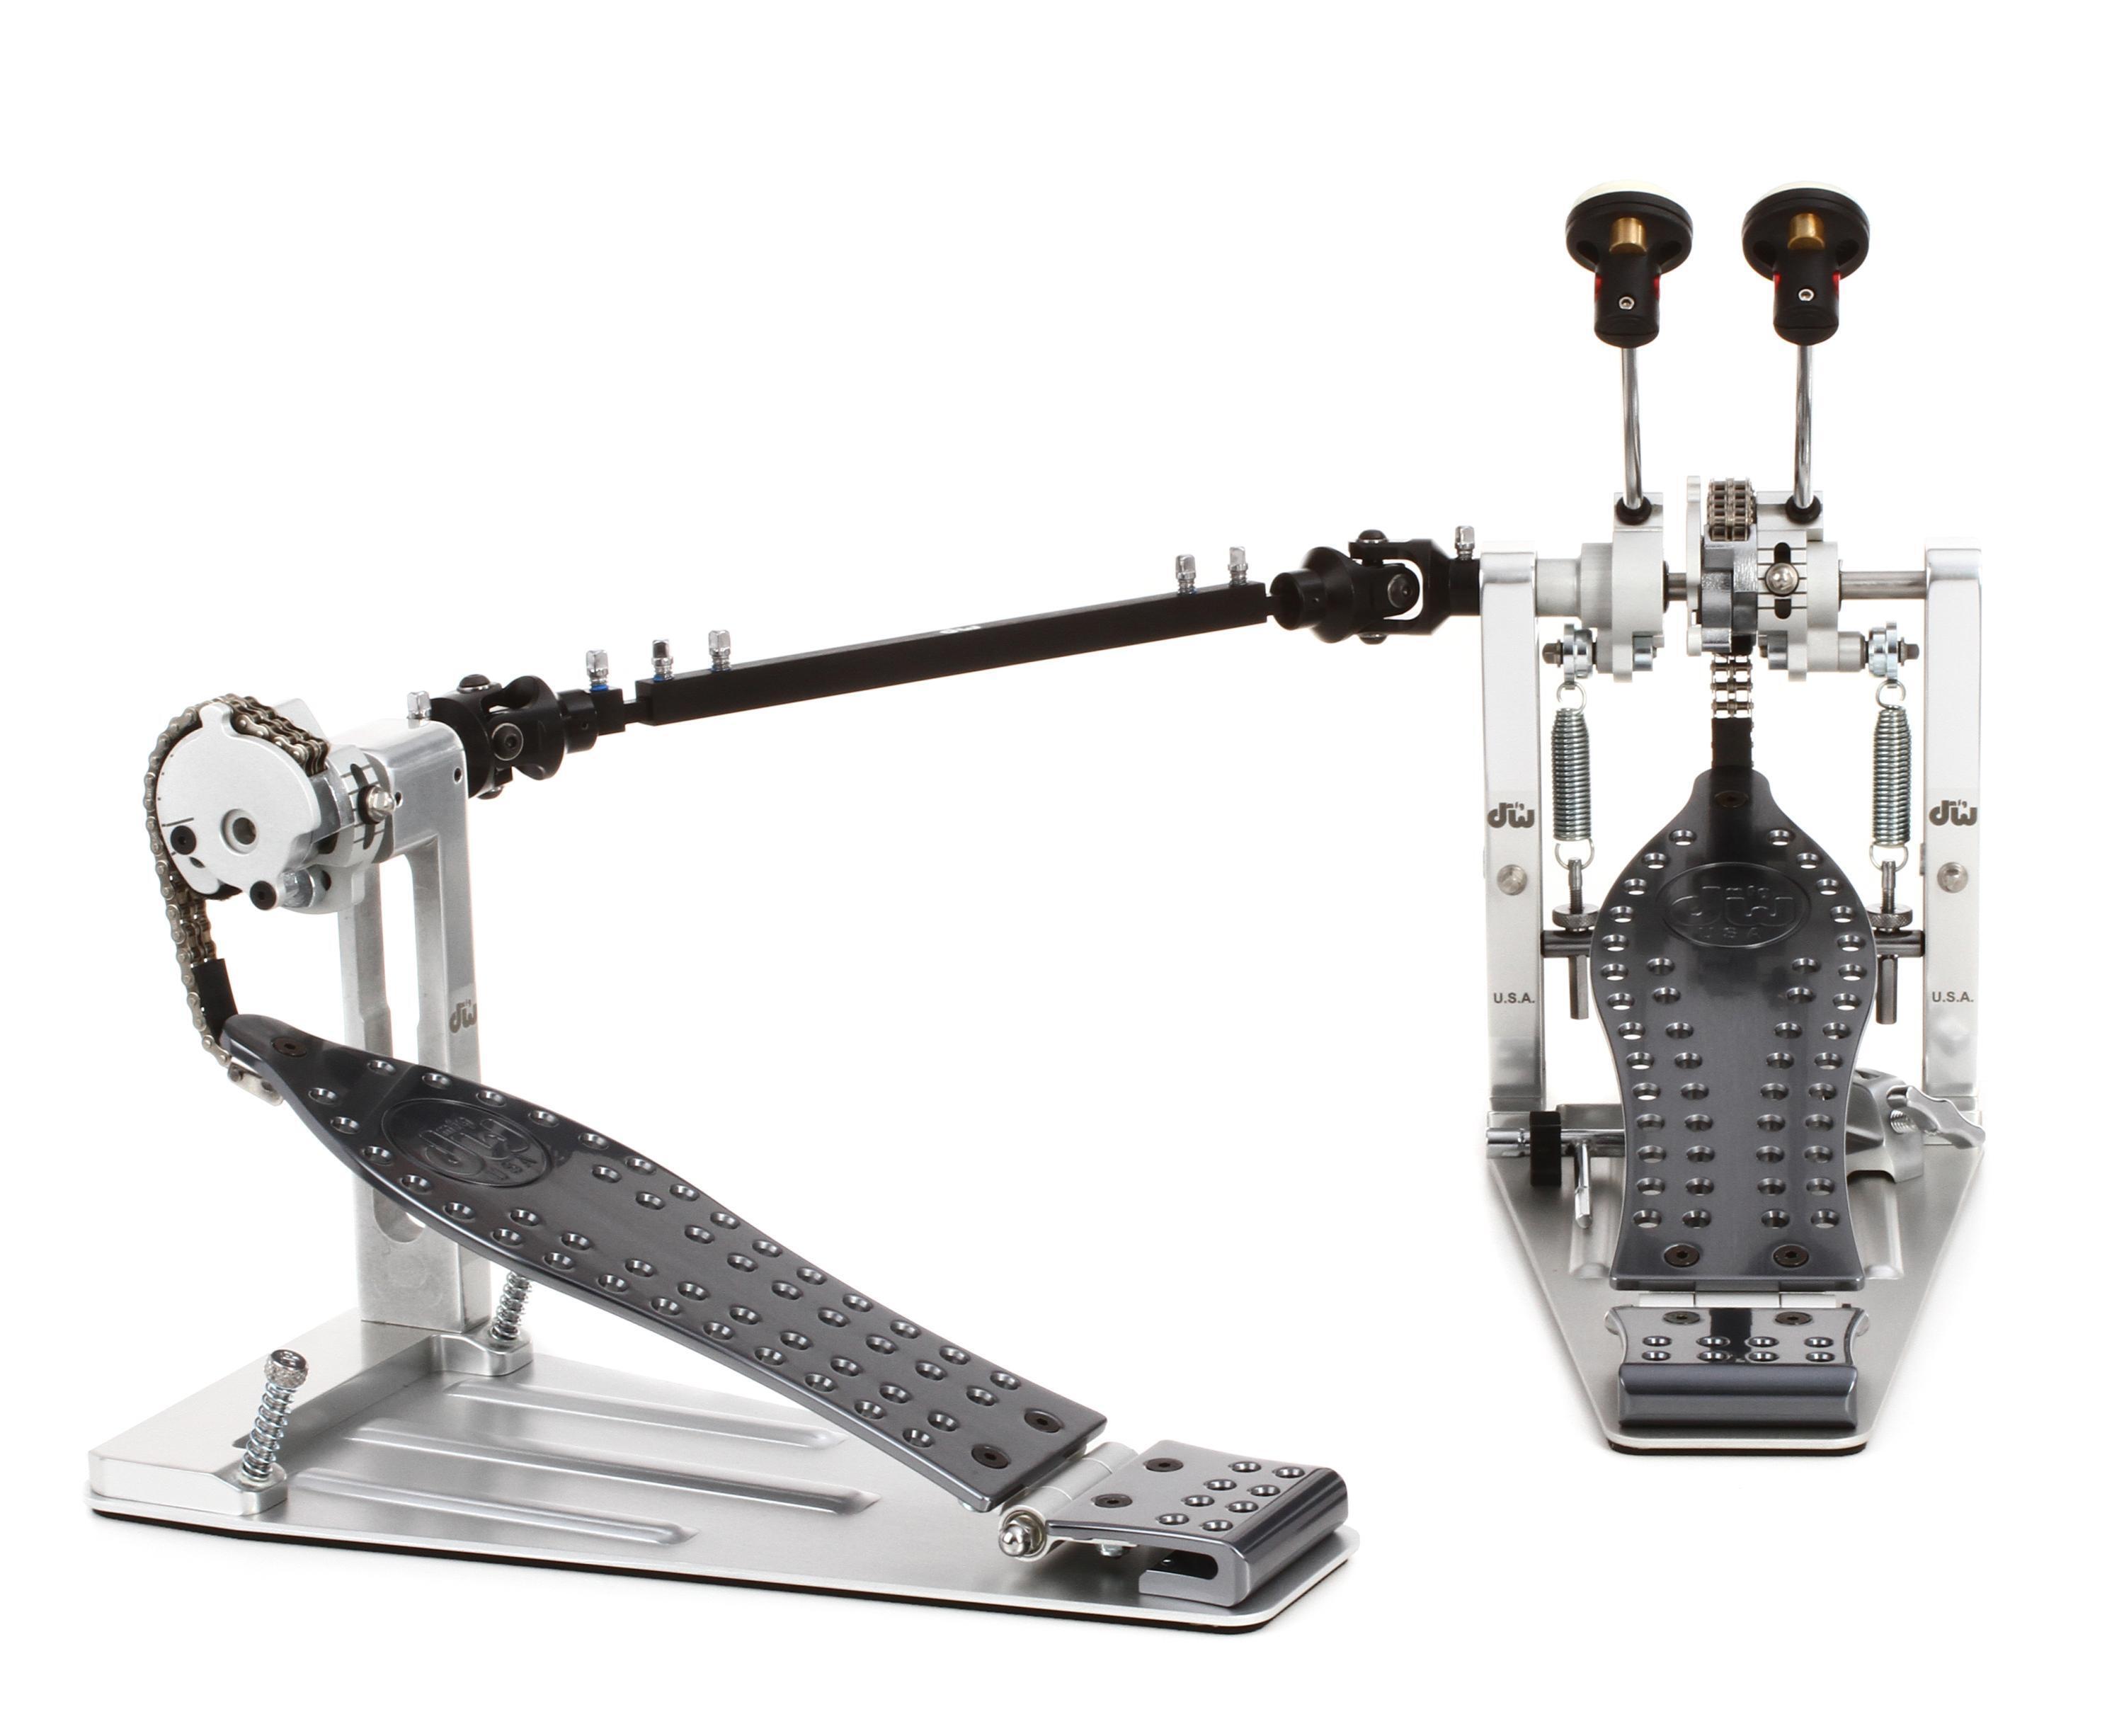 DW DWCPMCD2 MCD Machined Chain Drive Double Bass Drum Pedal - Polished